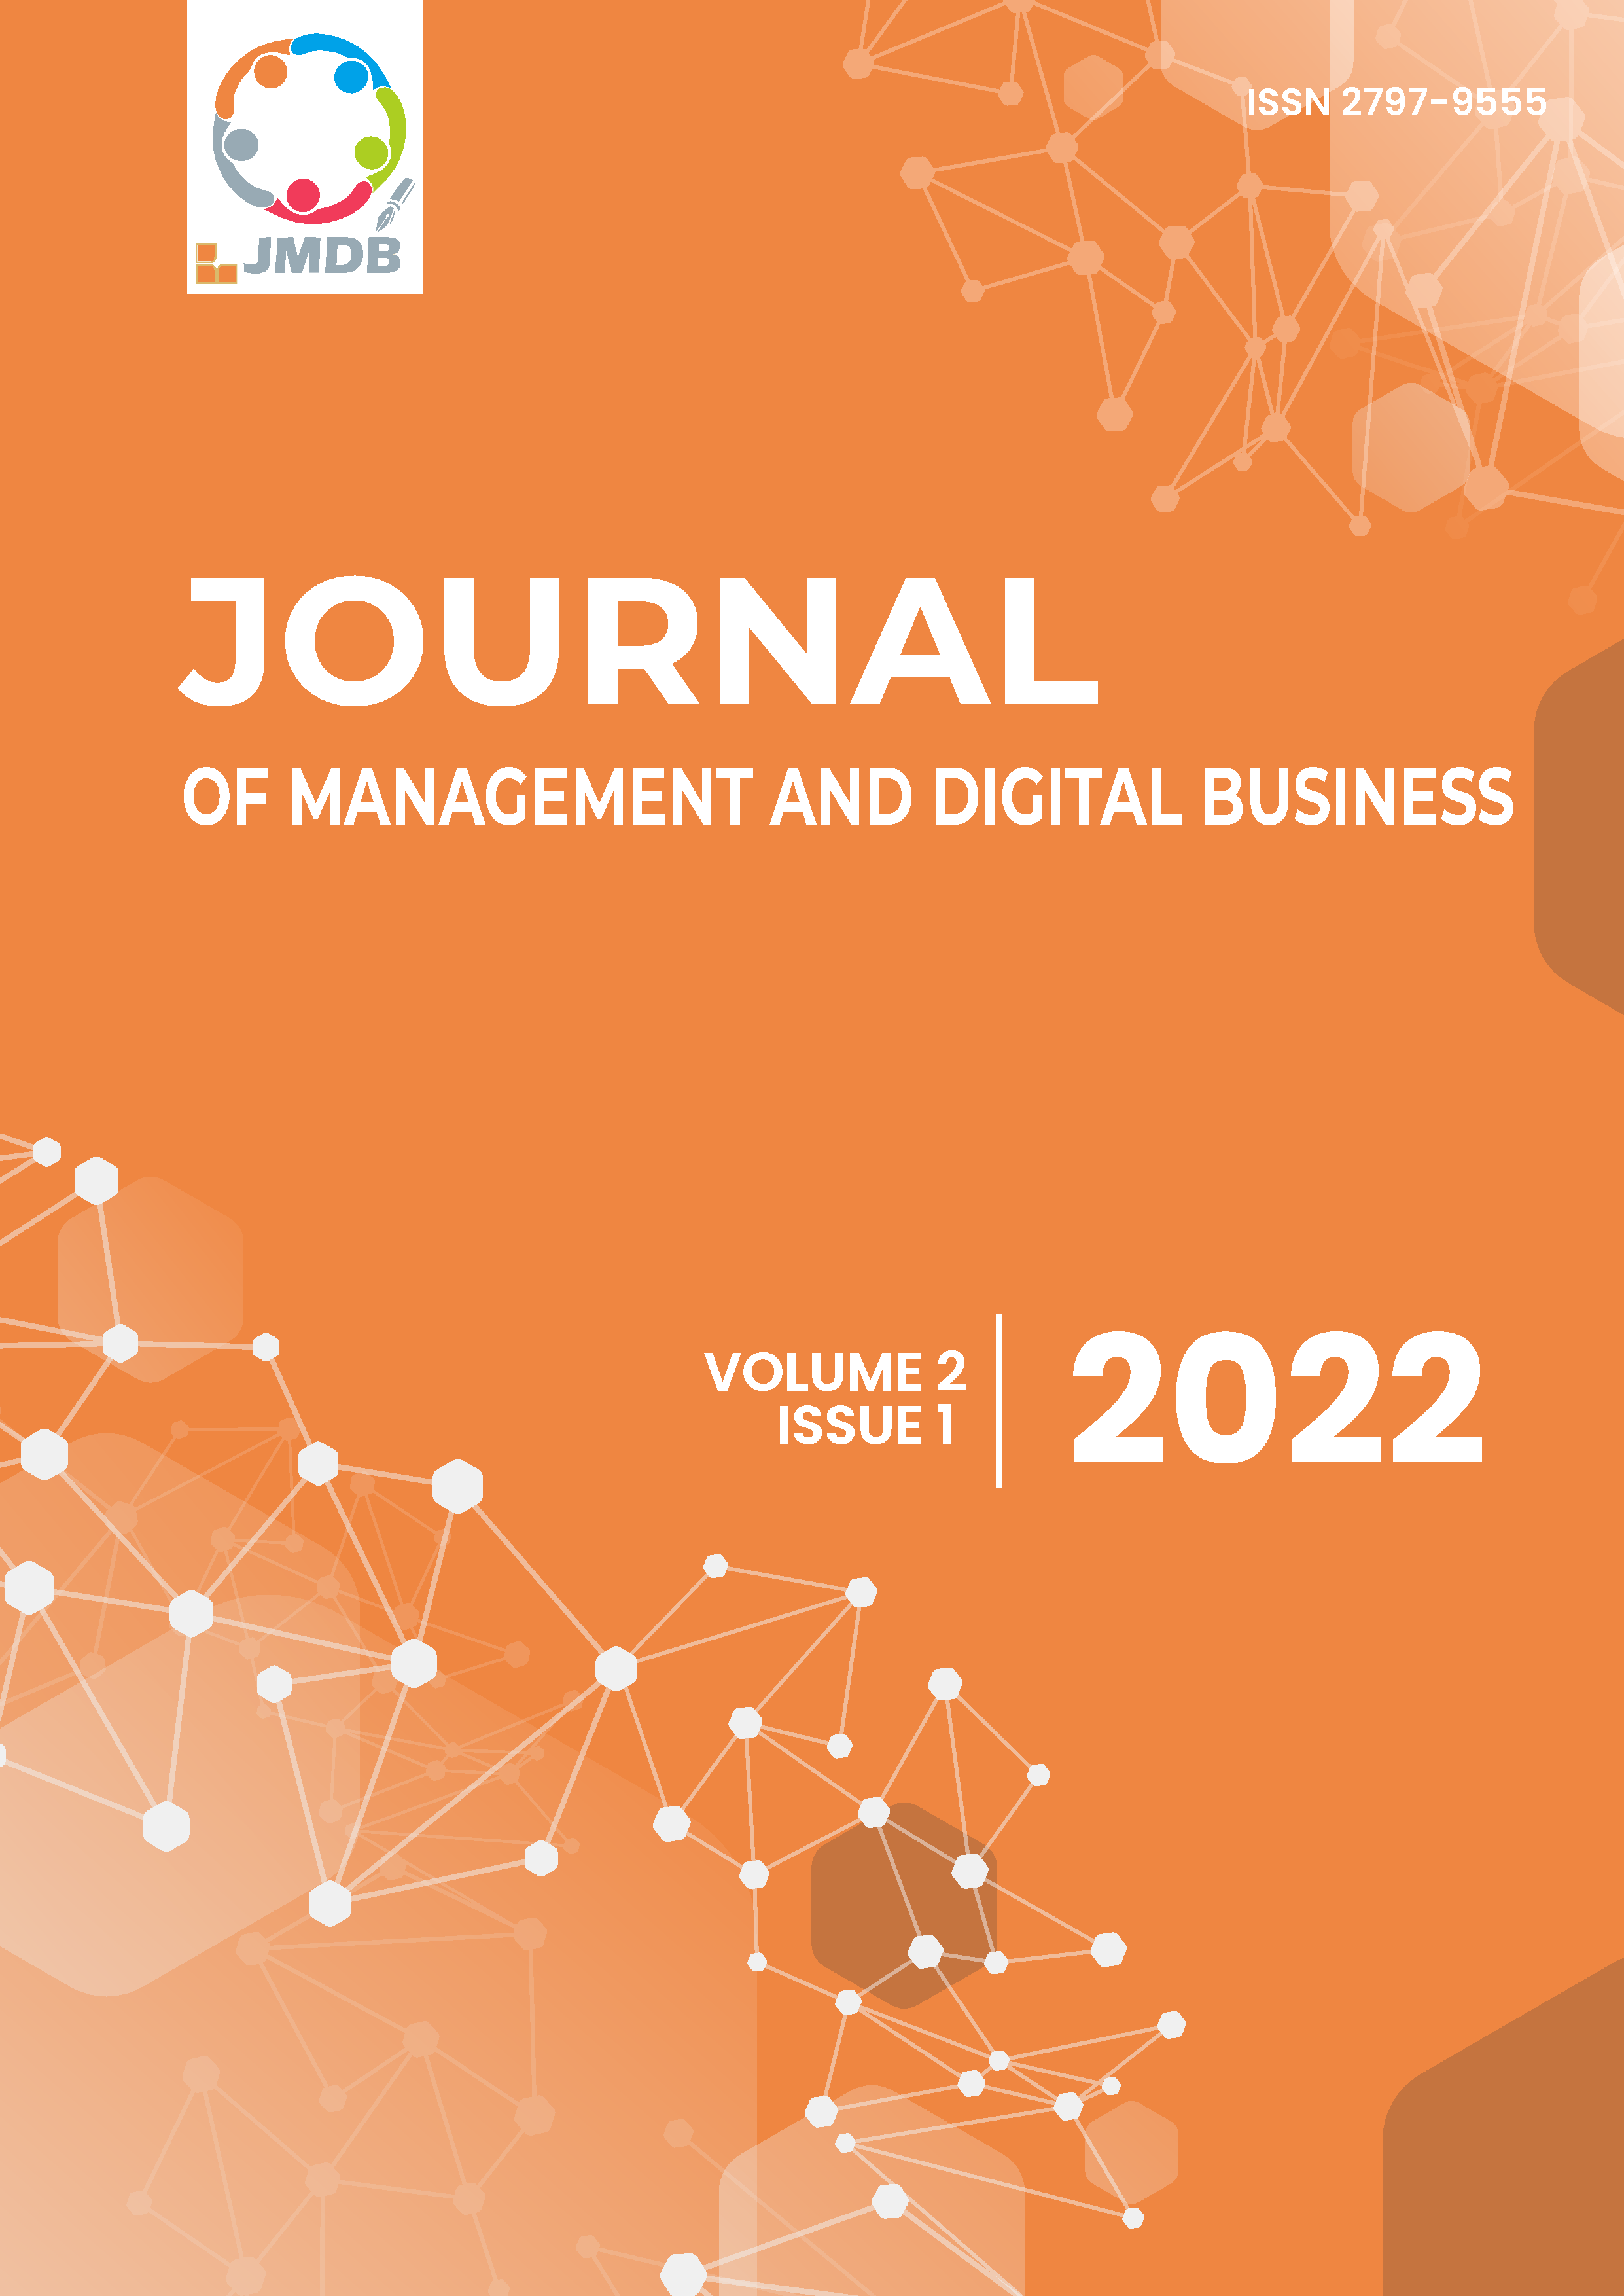 					View Vol. 2 No. 1 (2022): Journal of Management and Digital Business
				